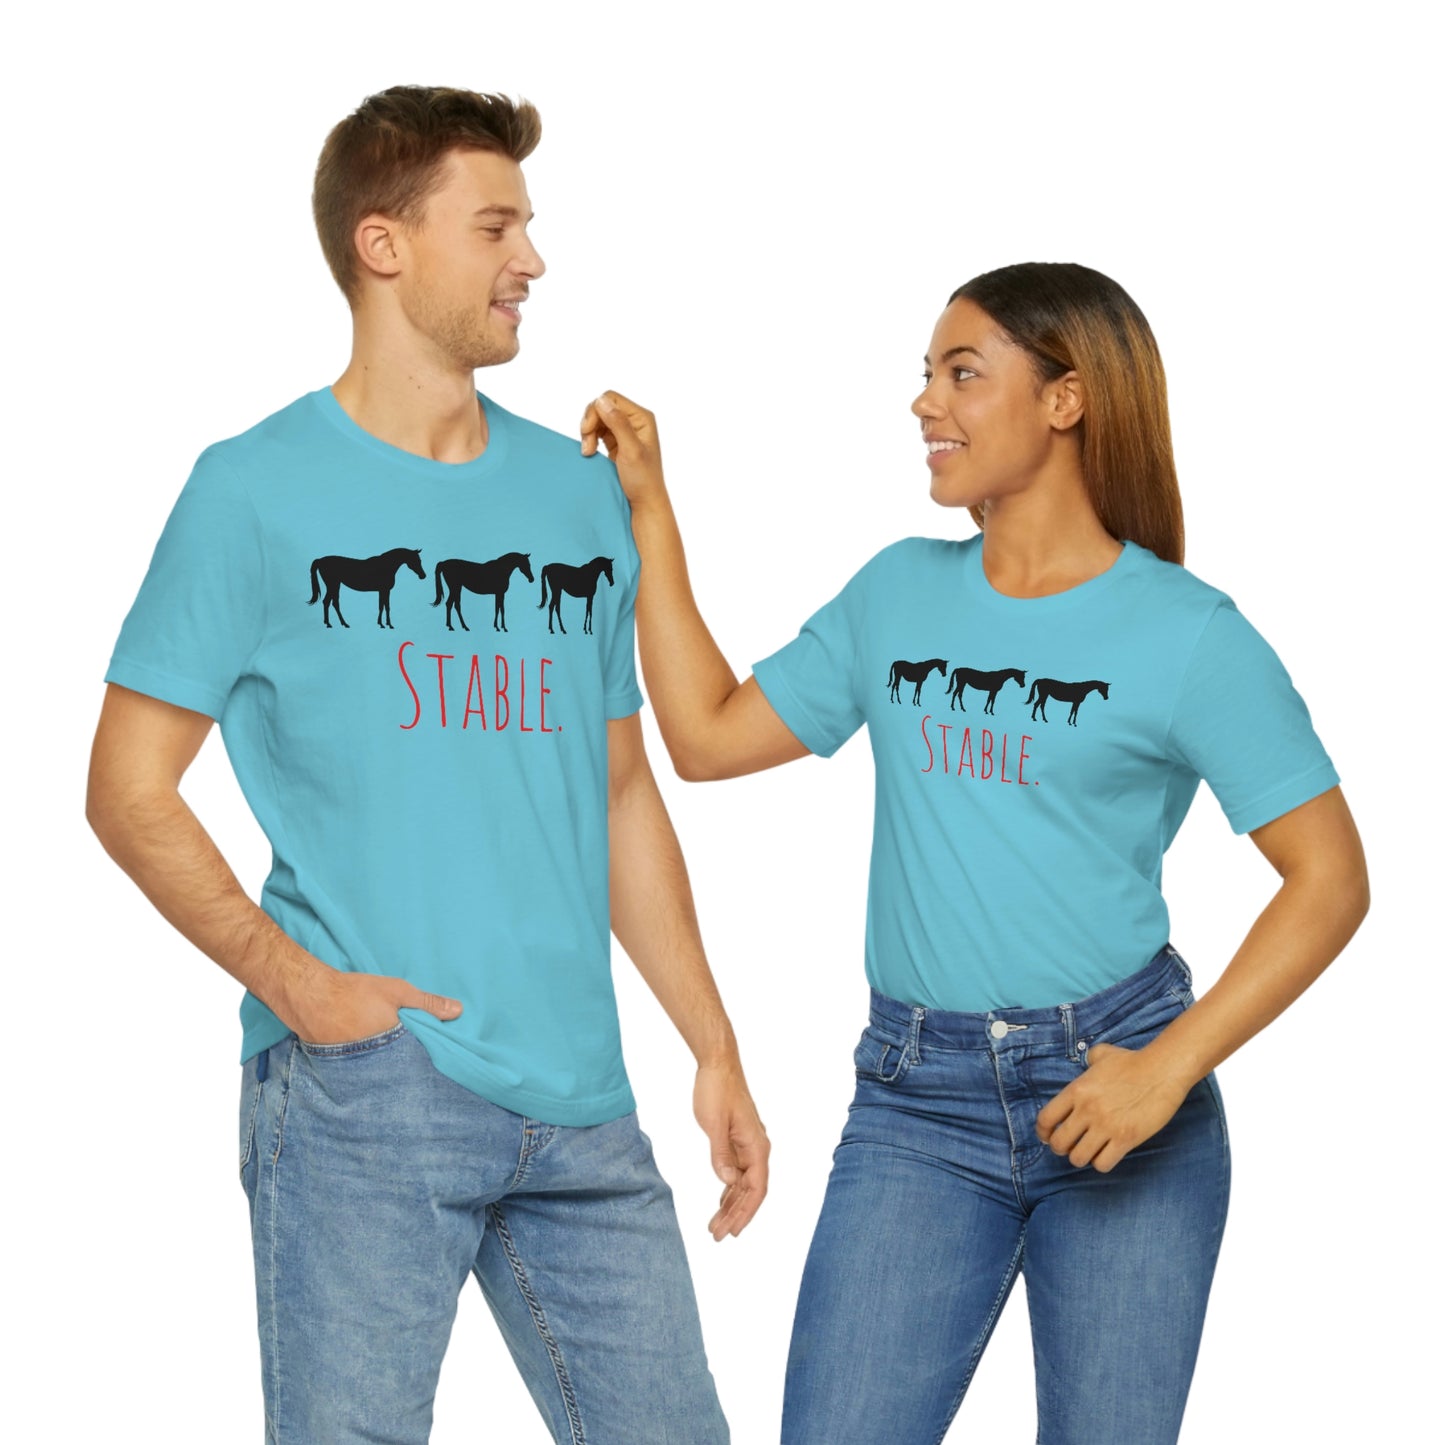 Stable of Horses T-shirt